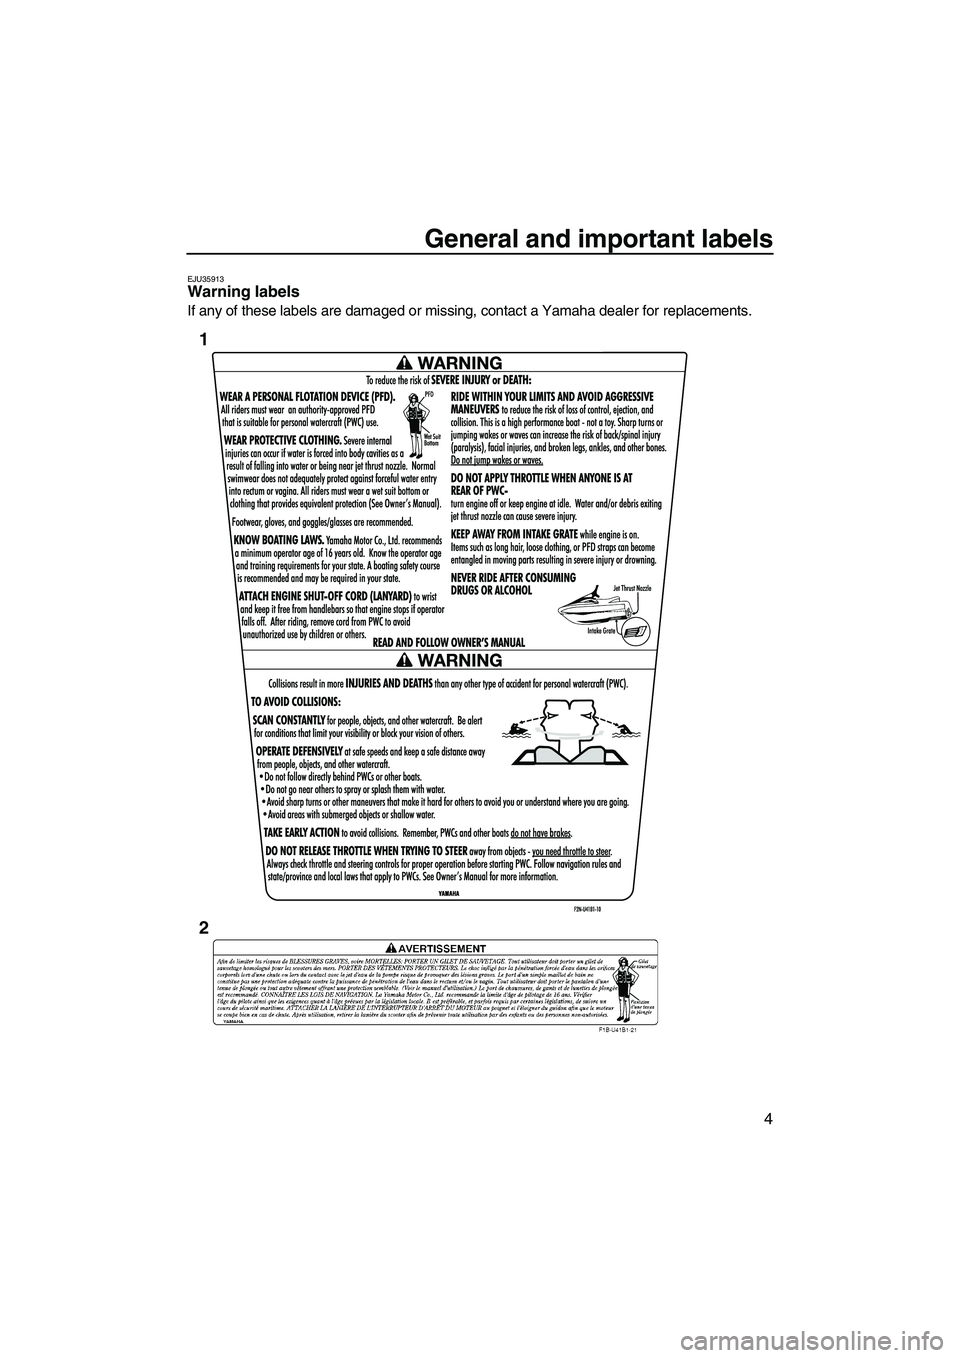 YAMAHA VX SPORT 2010 User Guide General and important labels
4
EJU35913Warning labels 
If any of these labels are damaged or missing, contact a Yamaha dealer for replacements.
1
2
UF2N70E0.book  Page 4  Tuesday, October 6, 2009  9:5